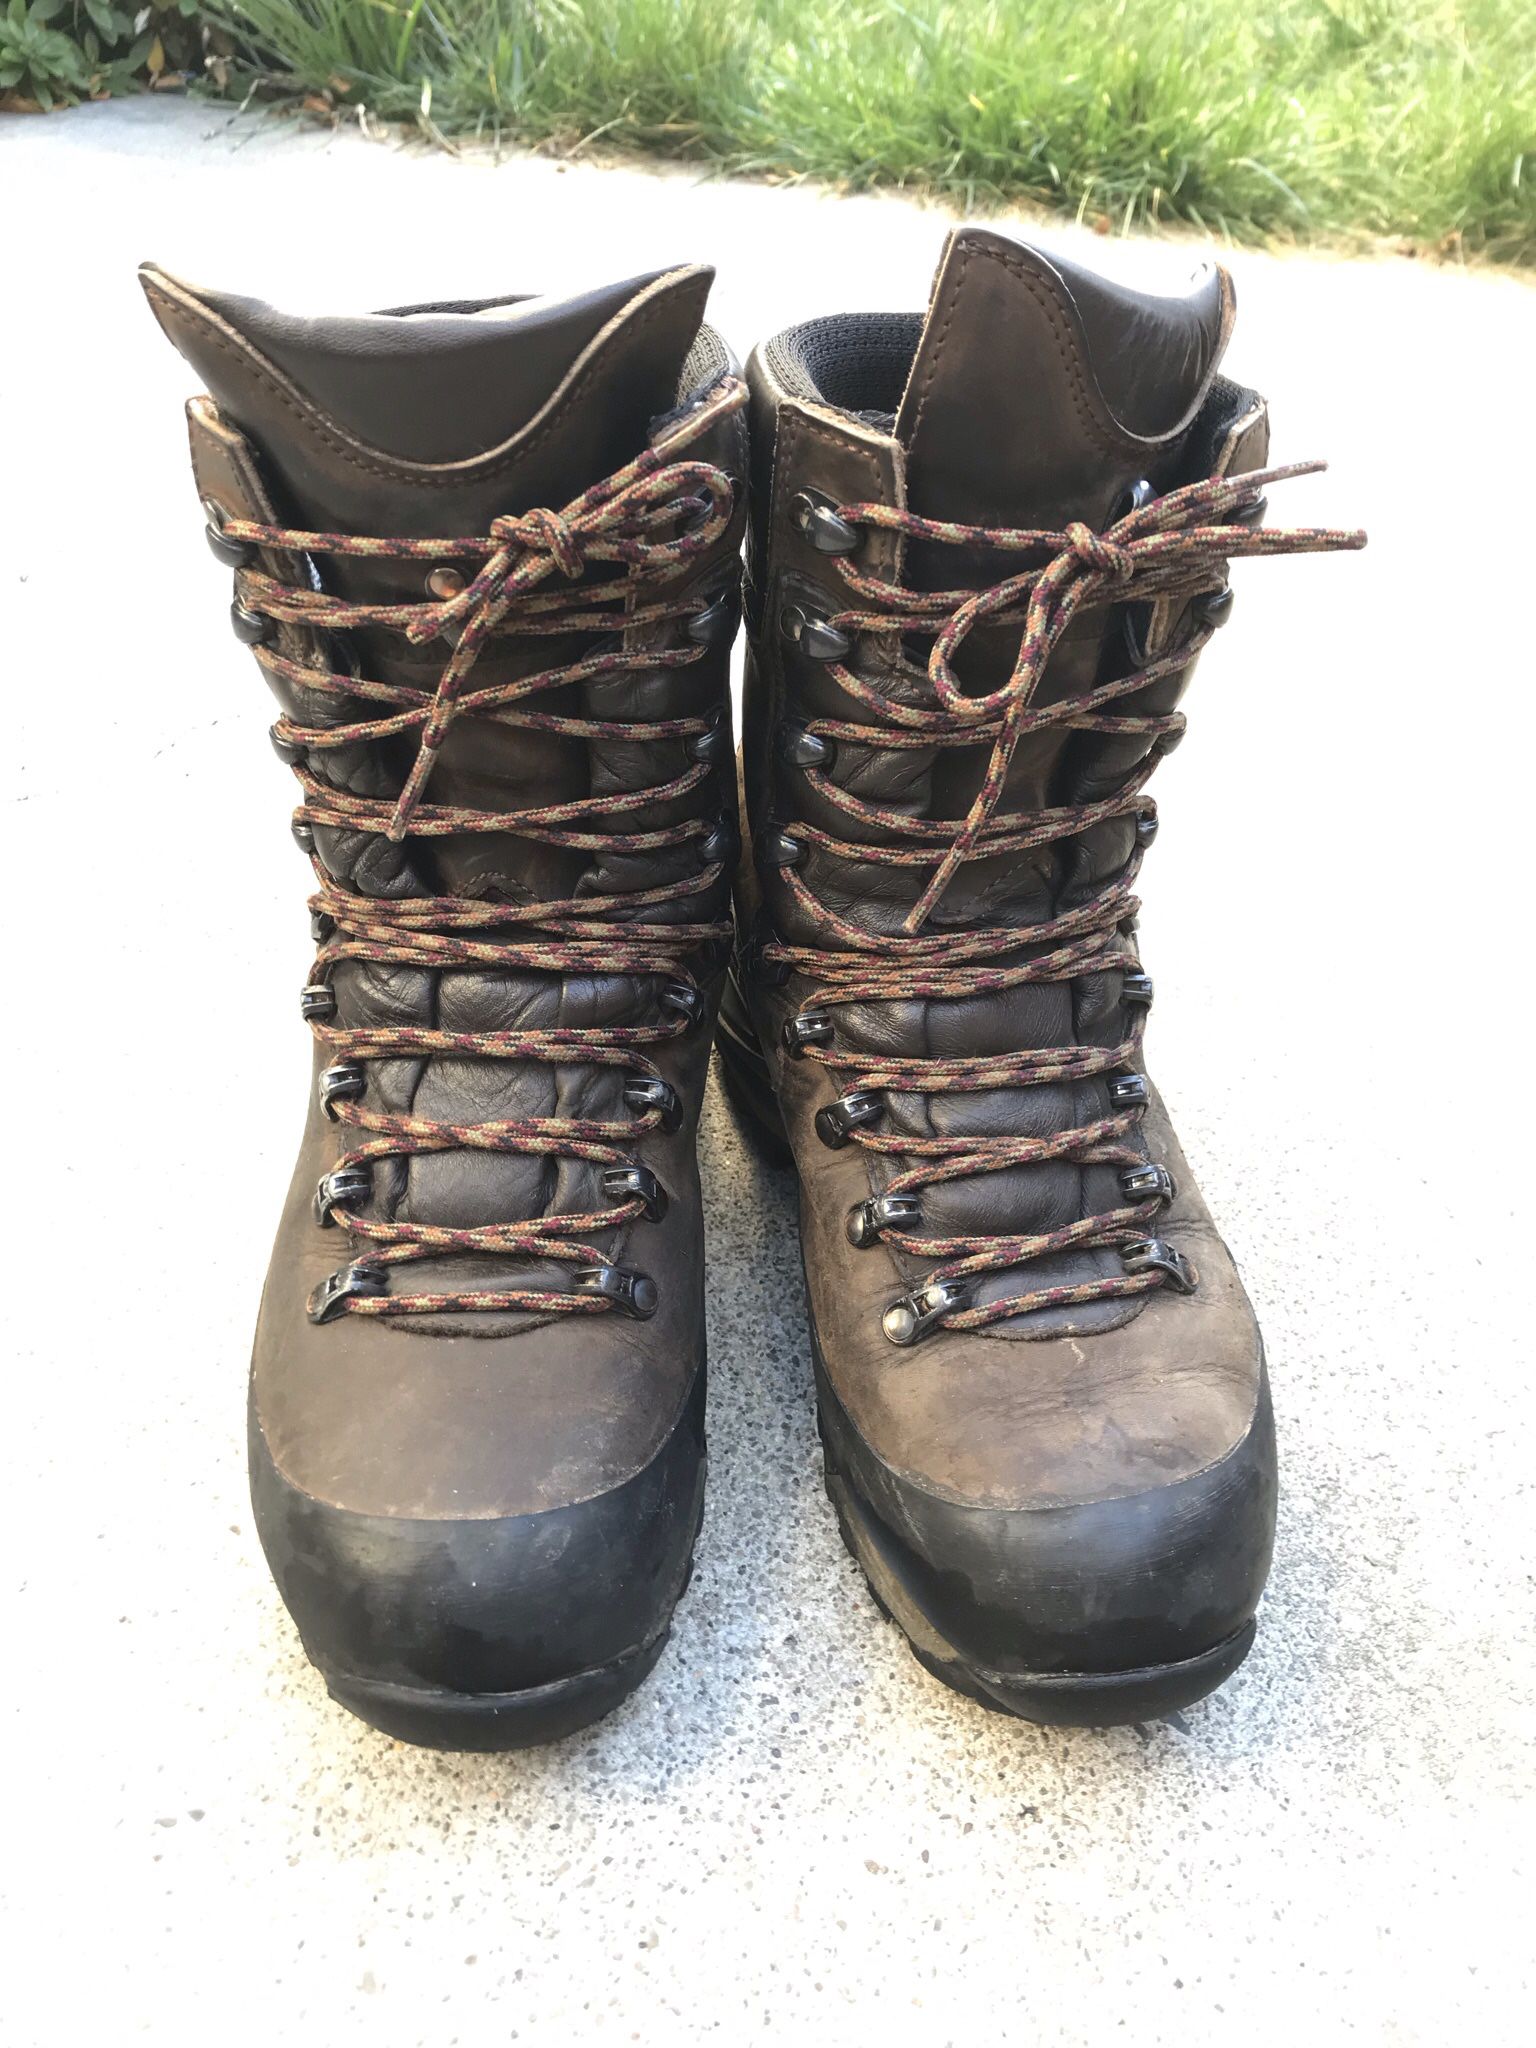 Schnee’s Hiking Boots 